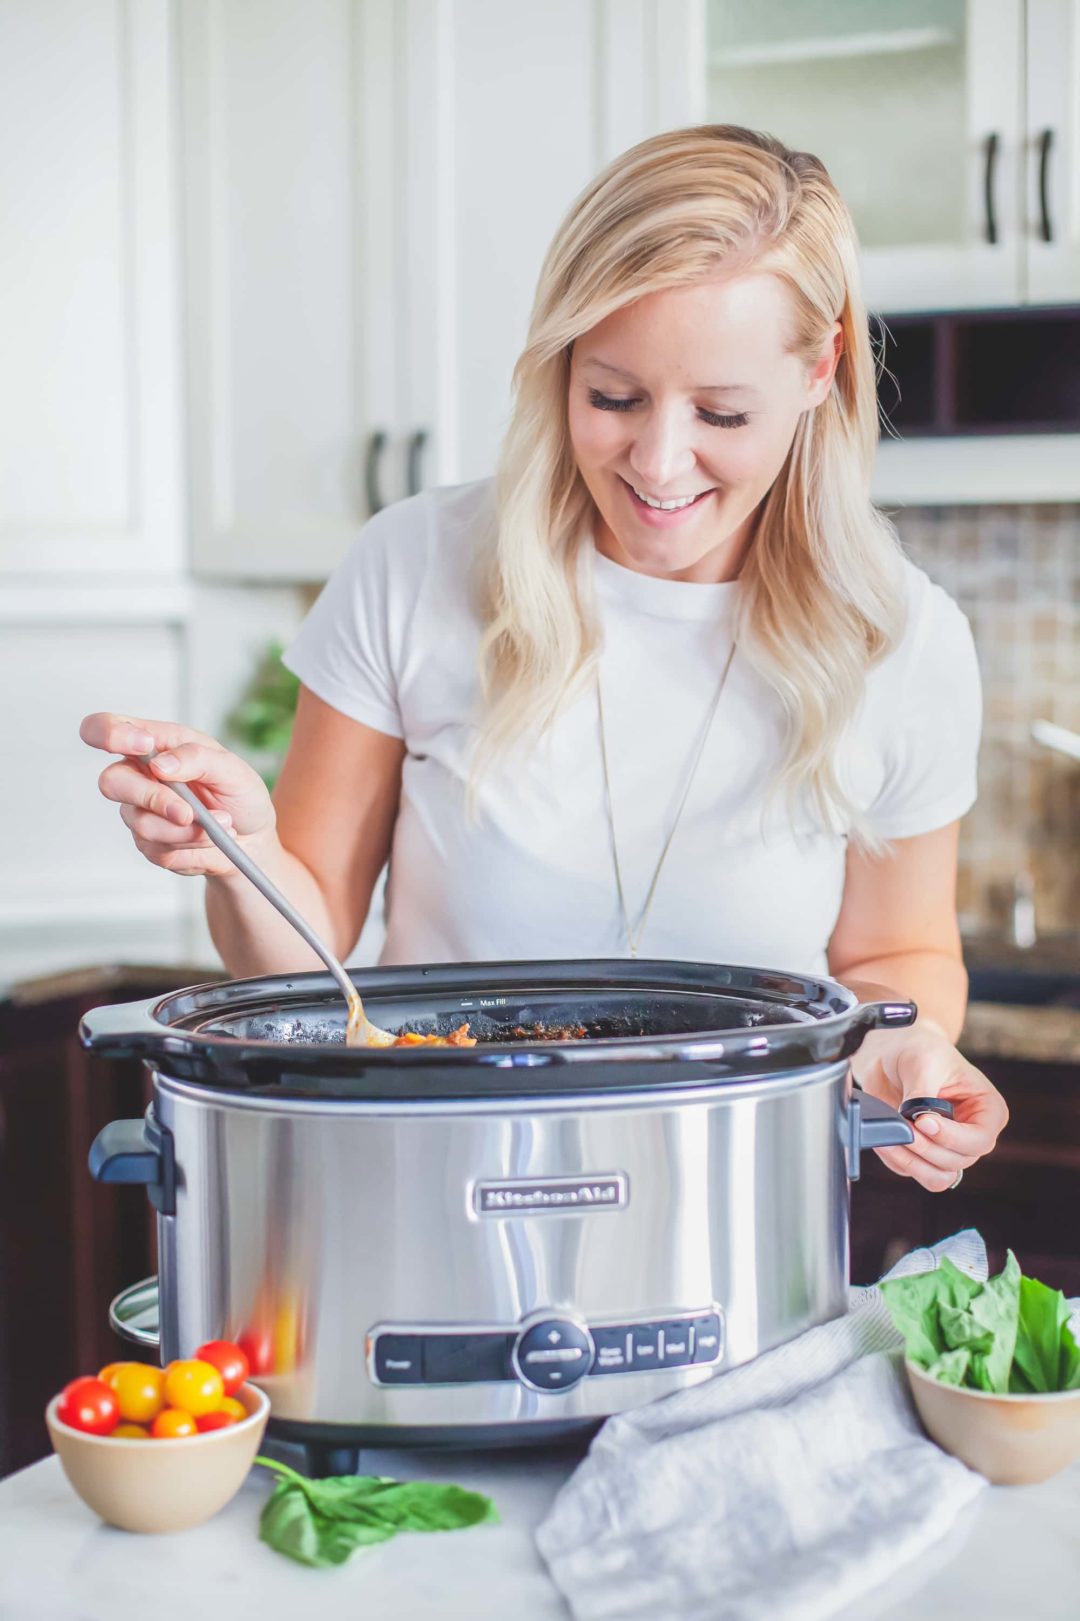 Making Slow-Cooker Lasagna Soup (dairy free, gluten free) with KitchenAid Slow Cooker in the kitchen